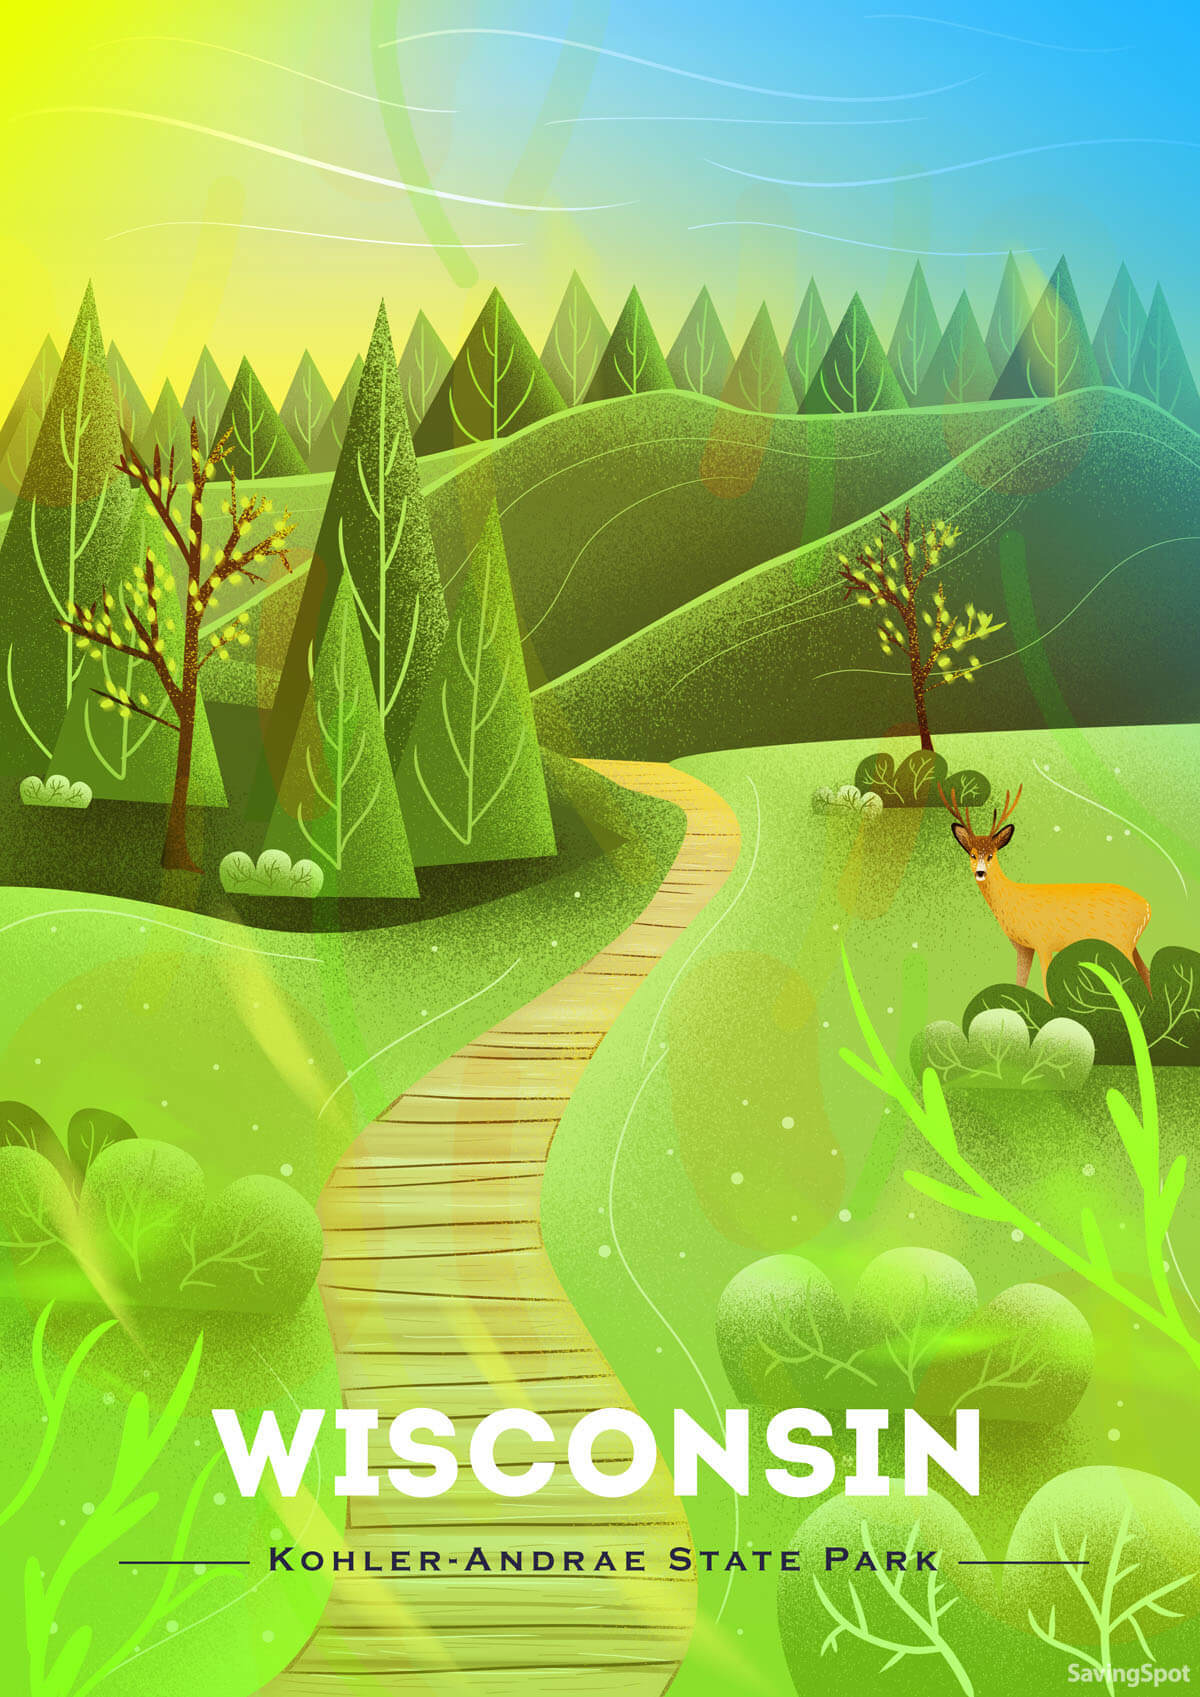 50 Most Underrated State Parks - Wisconsin